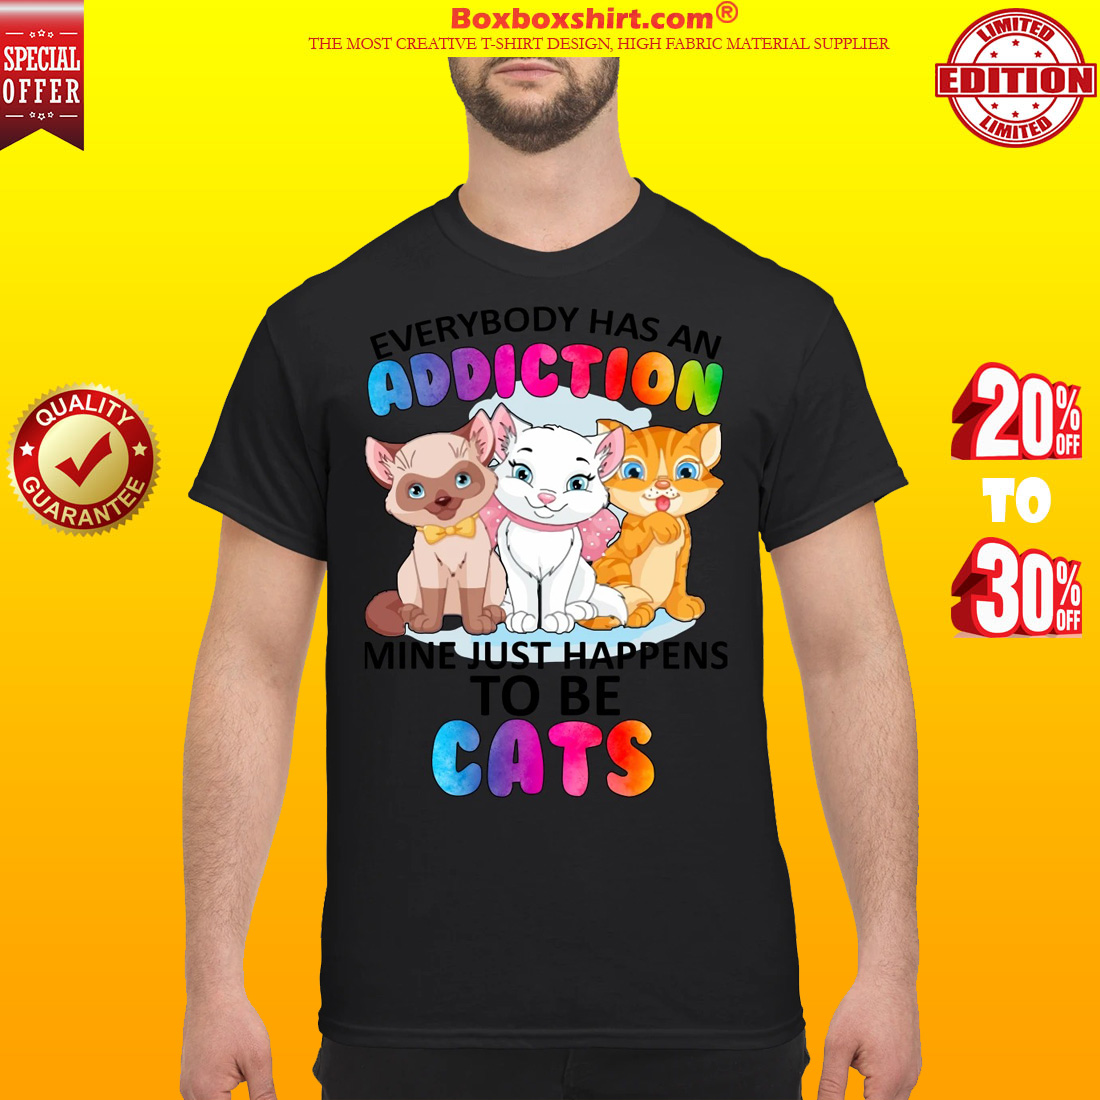 Everybody has an addiction mine just happens to be cats classic shirt